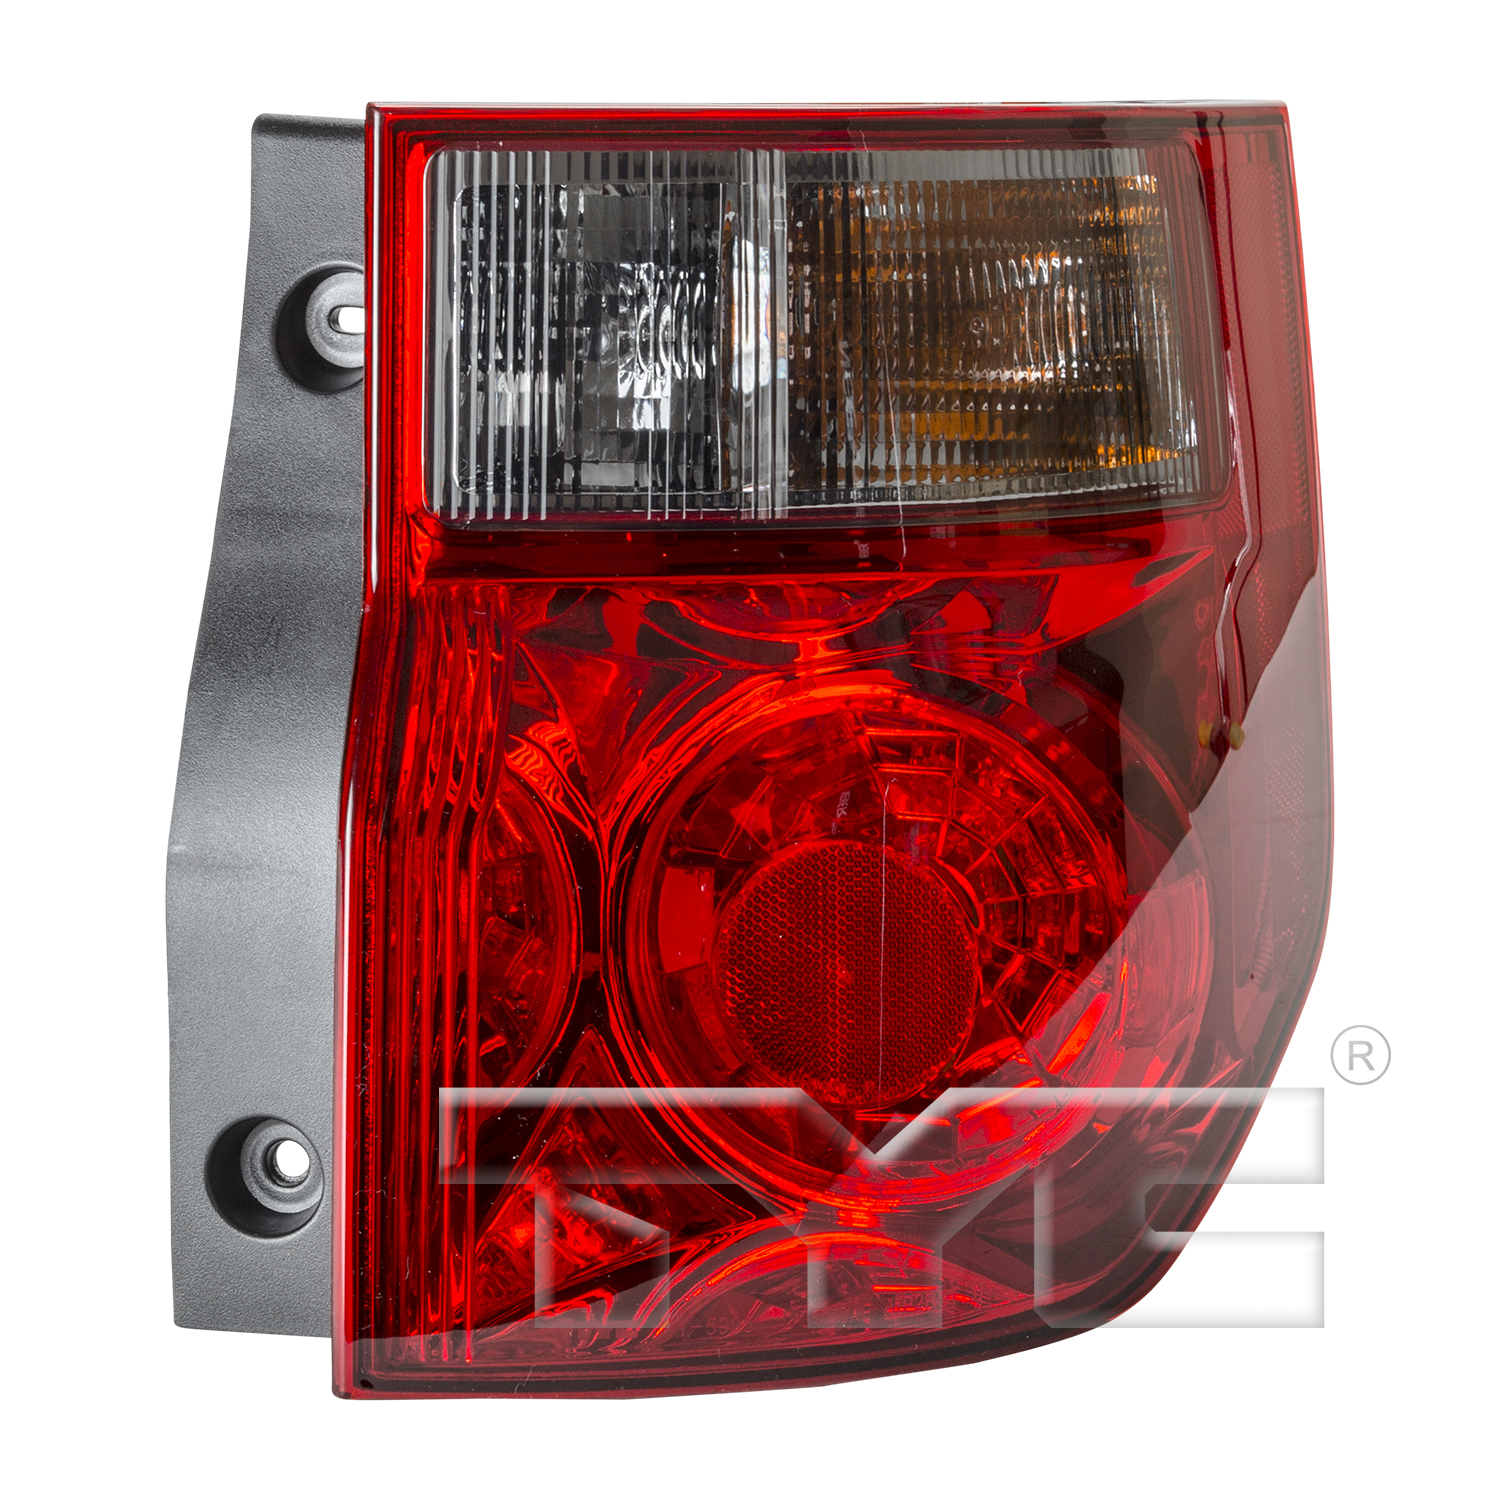 Aftermarket TAILLIGHTS for HONDA - ELEMENT, ELEMENT,03-08,RT Taillamp lens/housing